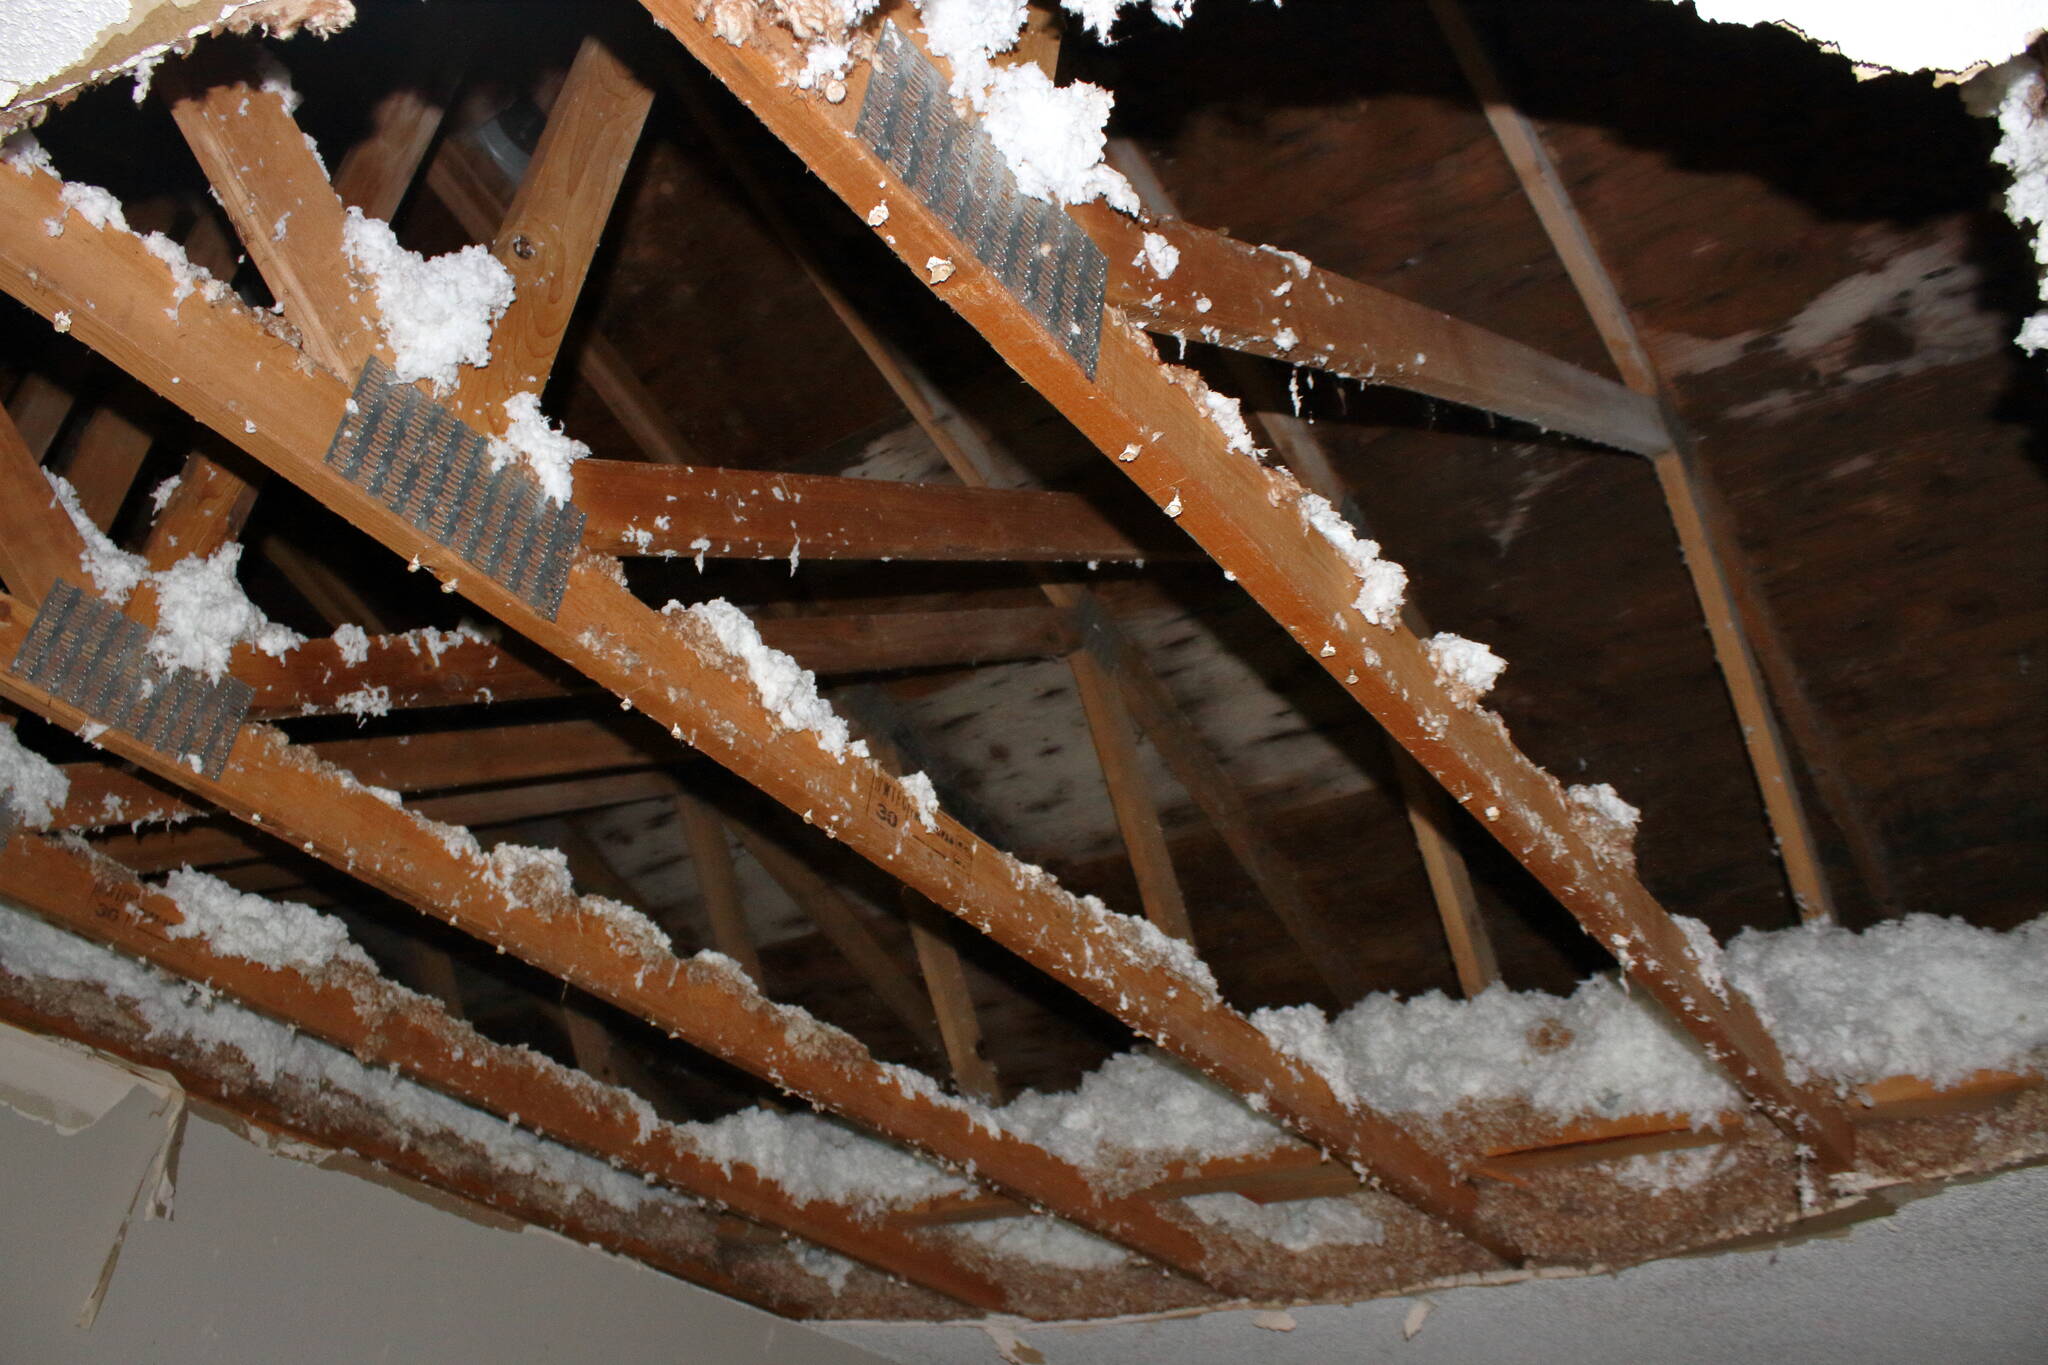 Exposed beams reveal the entirety of the roof after the ceiling fell in at an apartment in the Miro apartment complex. (Photo by Keelin Everly-Lang/The Mirror)